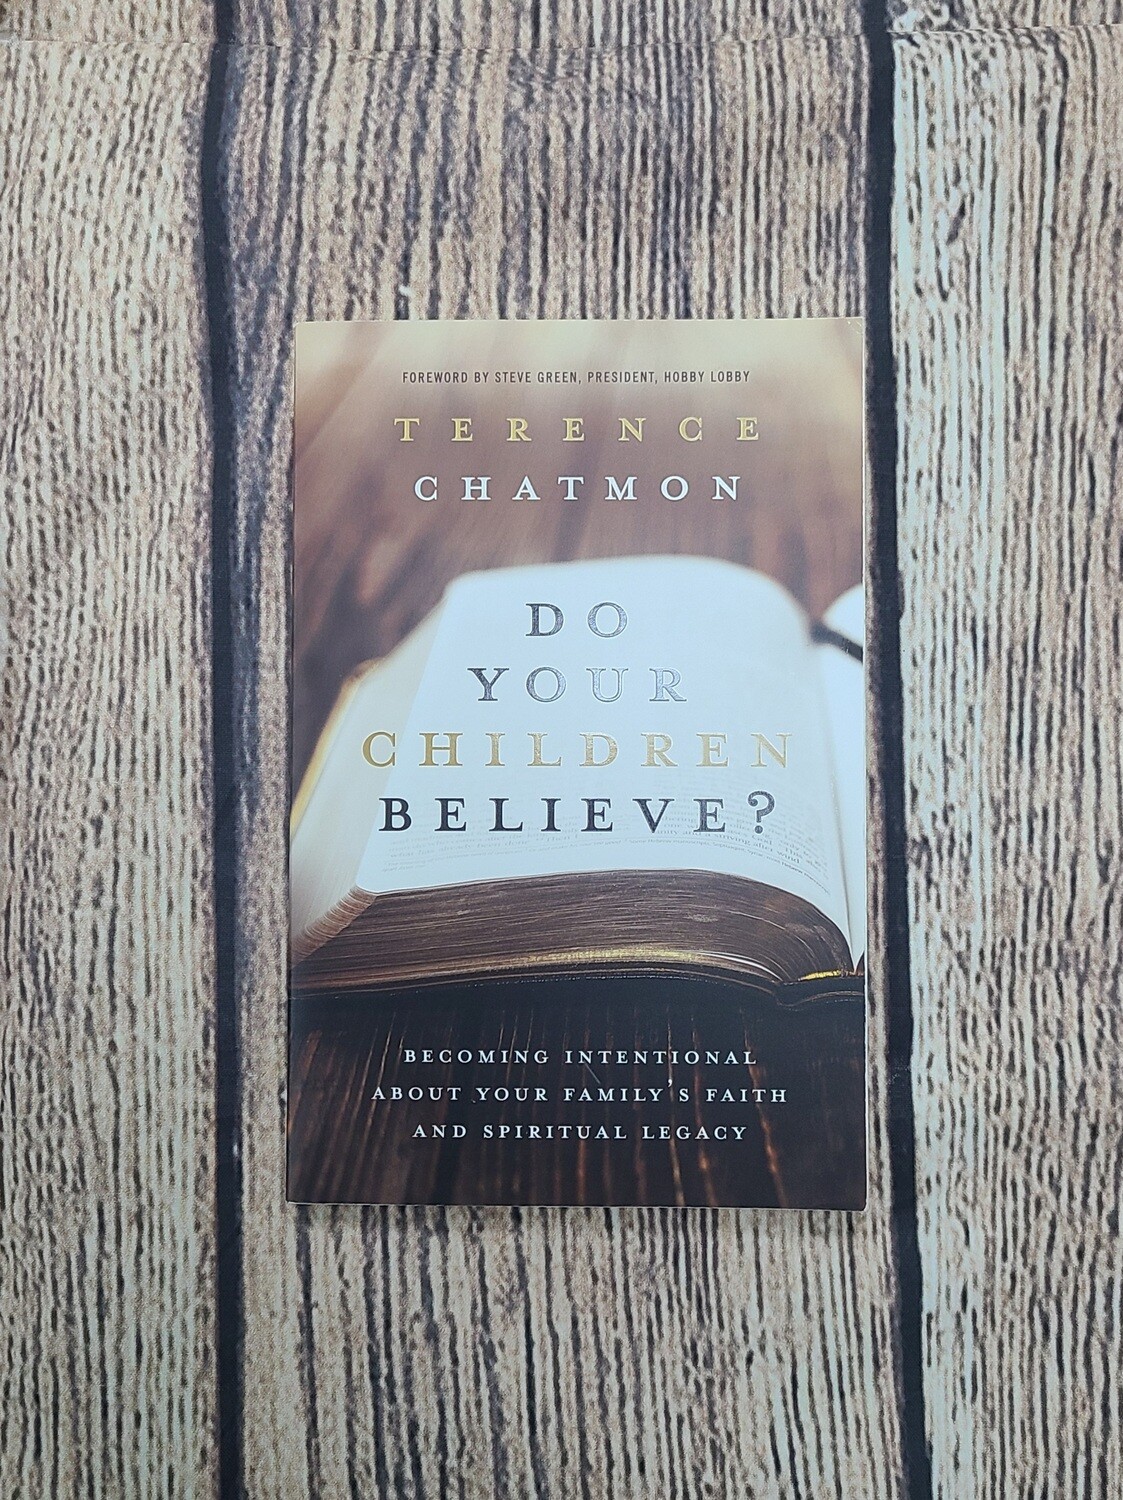 Do Your Children Believe? by Terence Chatmon